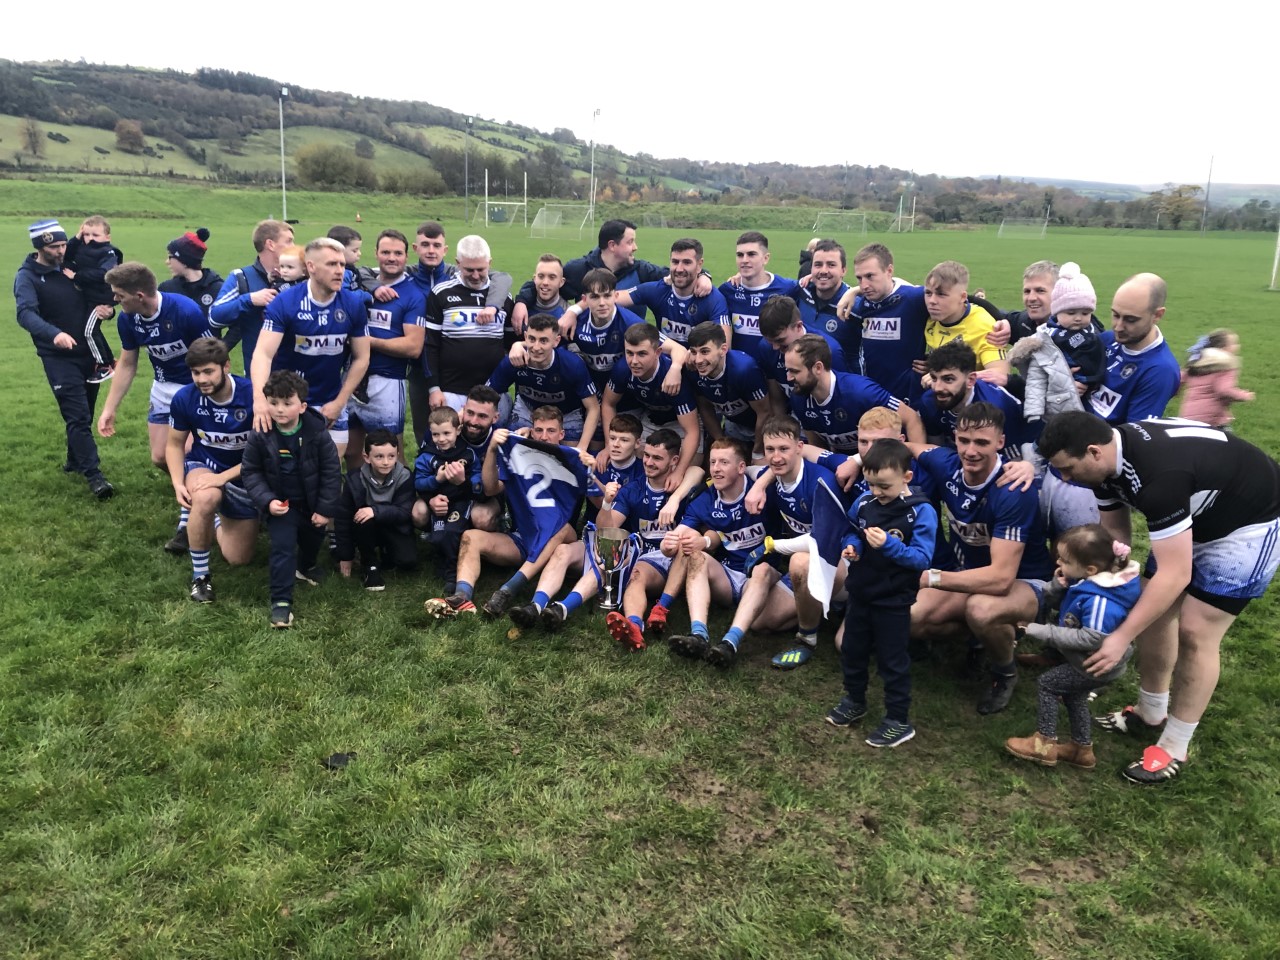 Cloughaneely v Dungloe Intermediate Final Replay - Cloughaneely with Cup